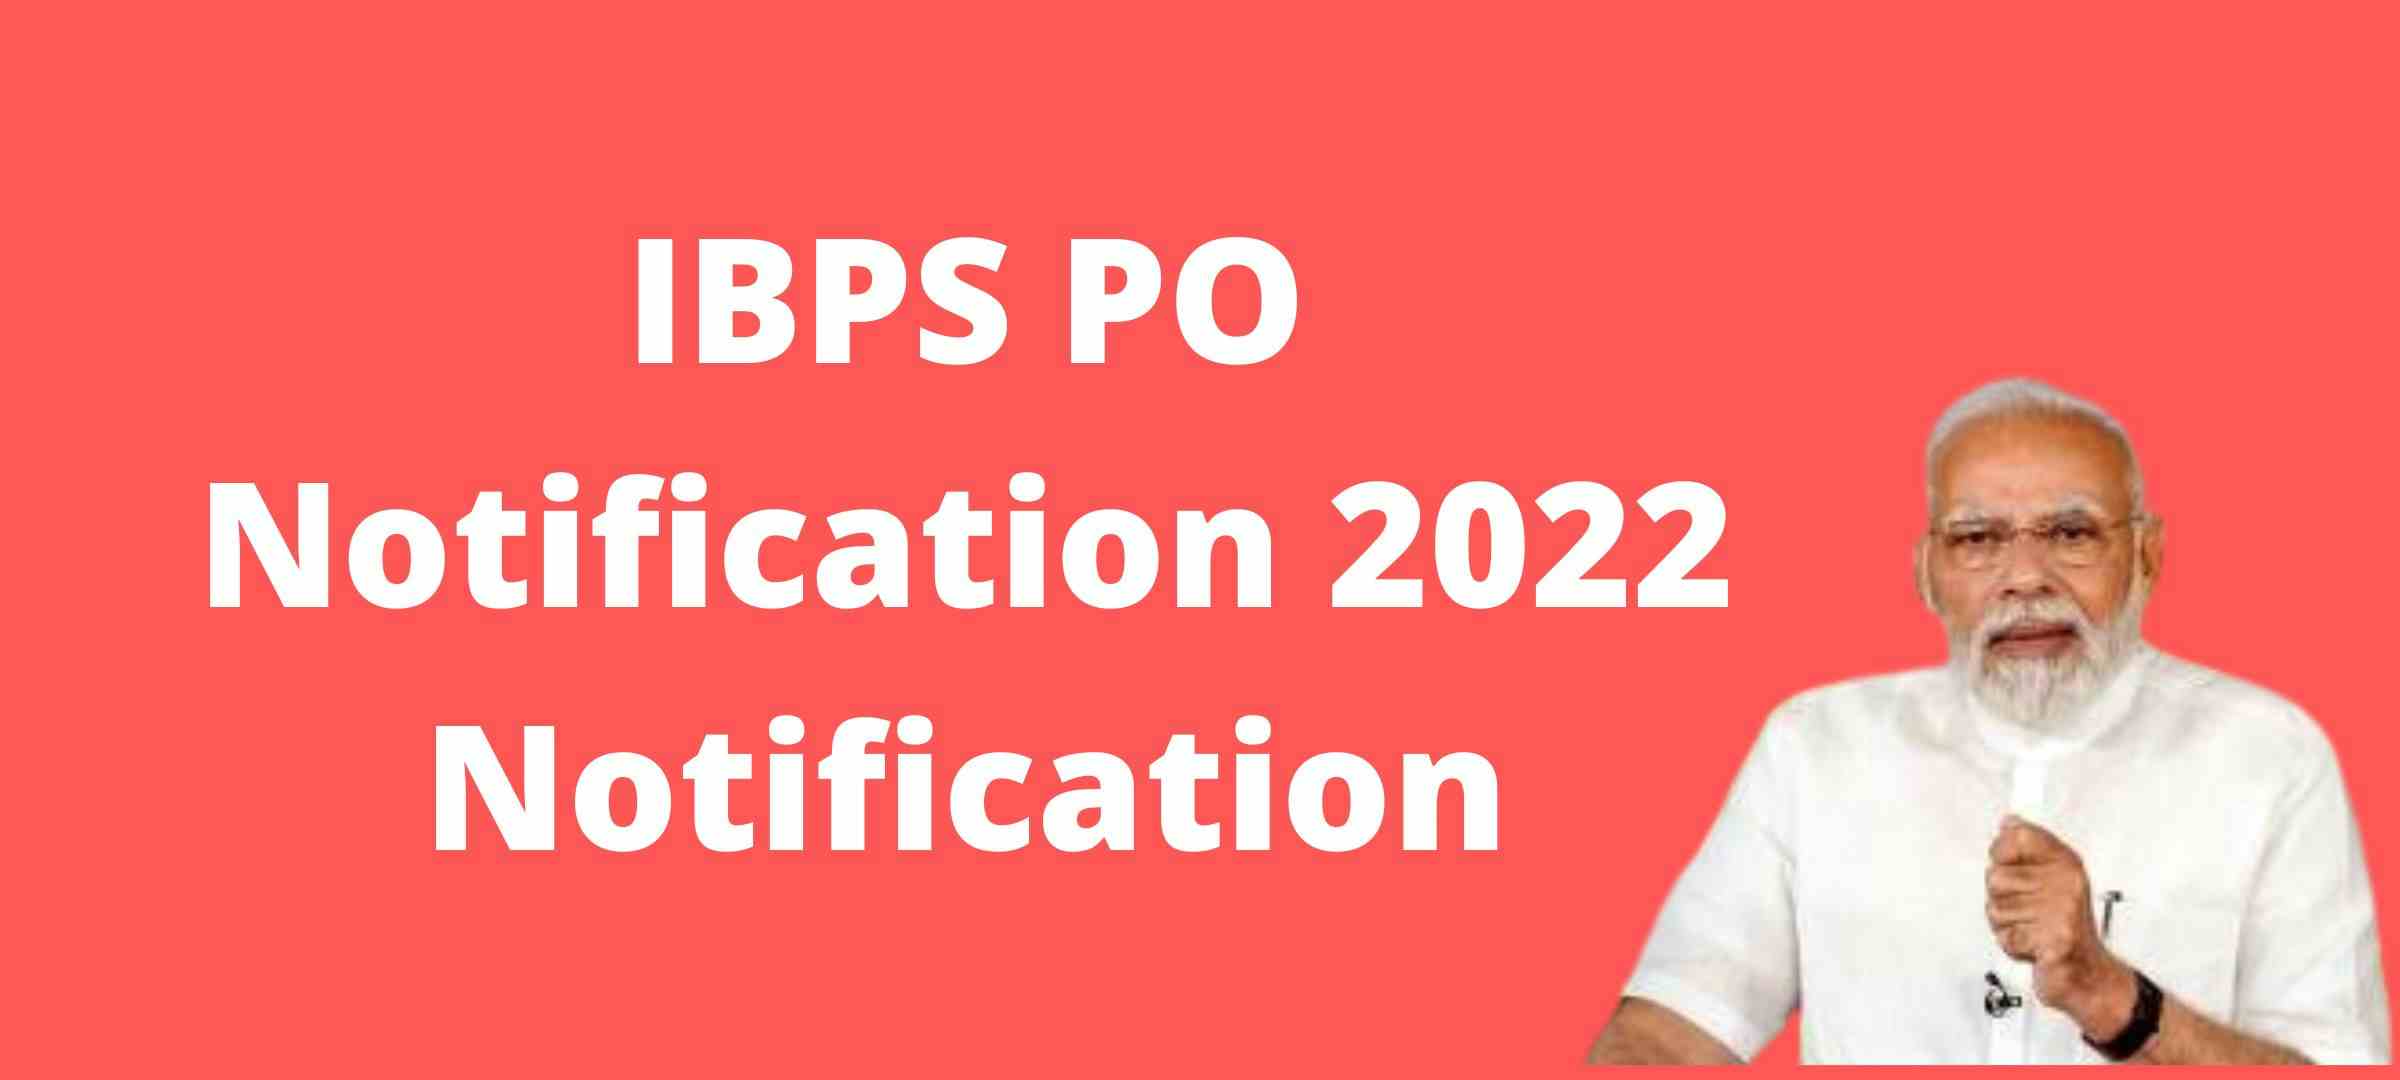 IBPS PO notification 2022 Notification | IBPS PO Notification 2022 last date to apply